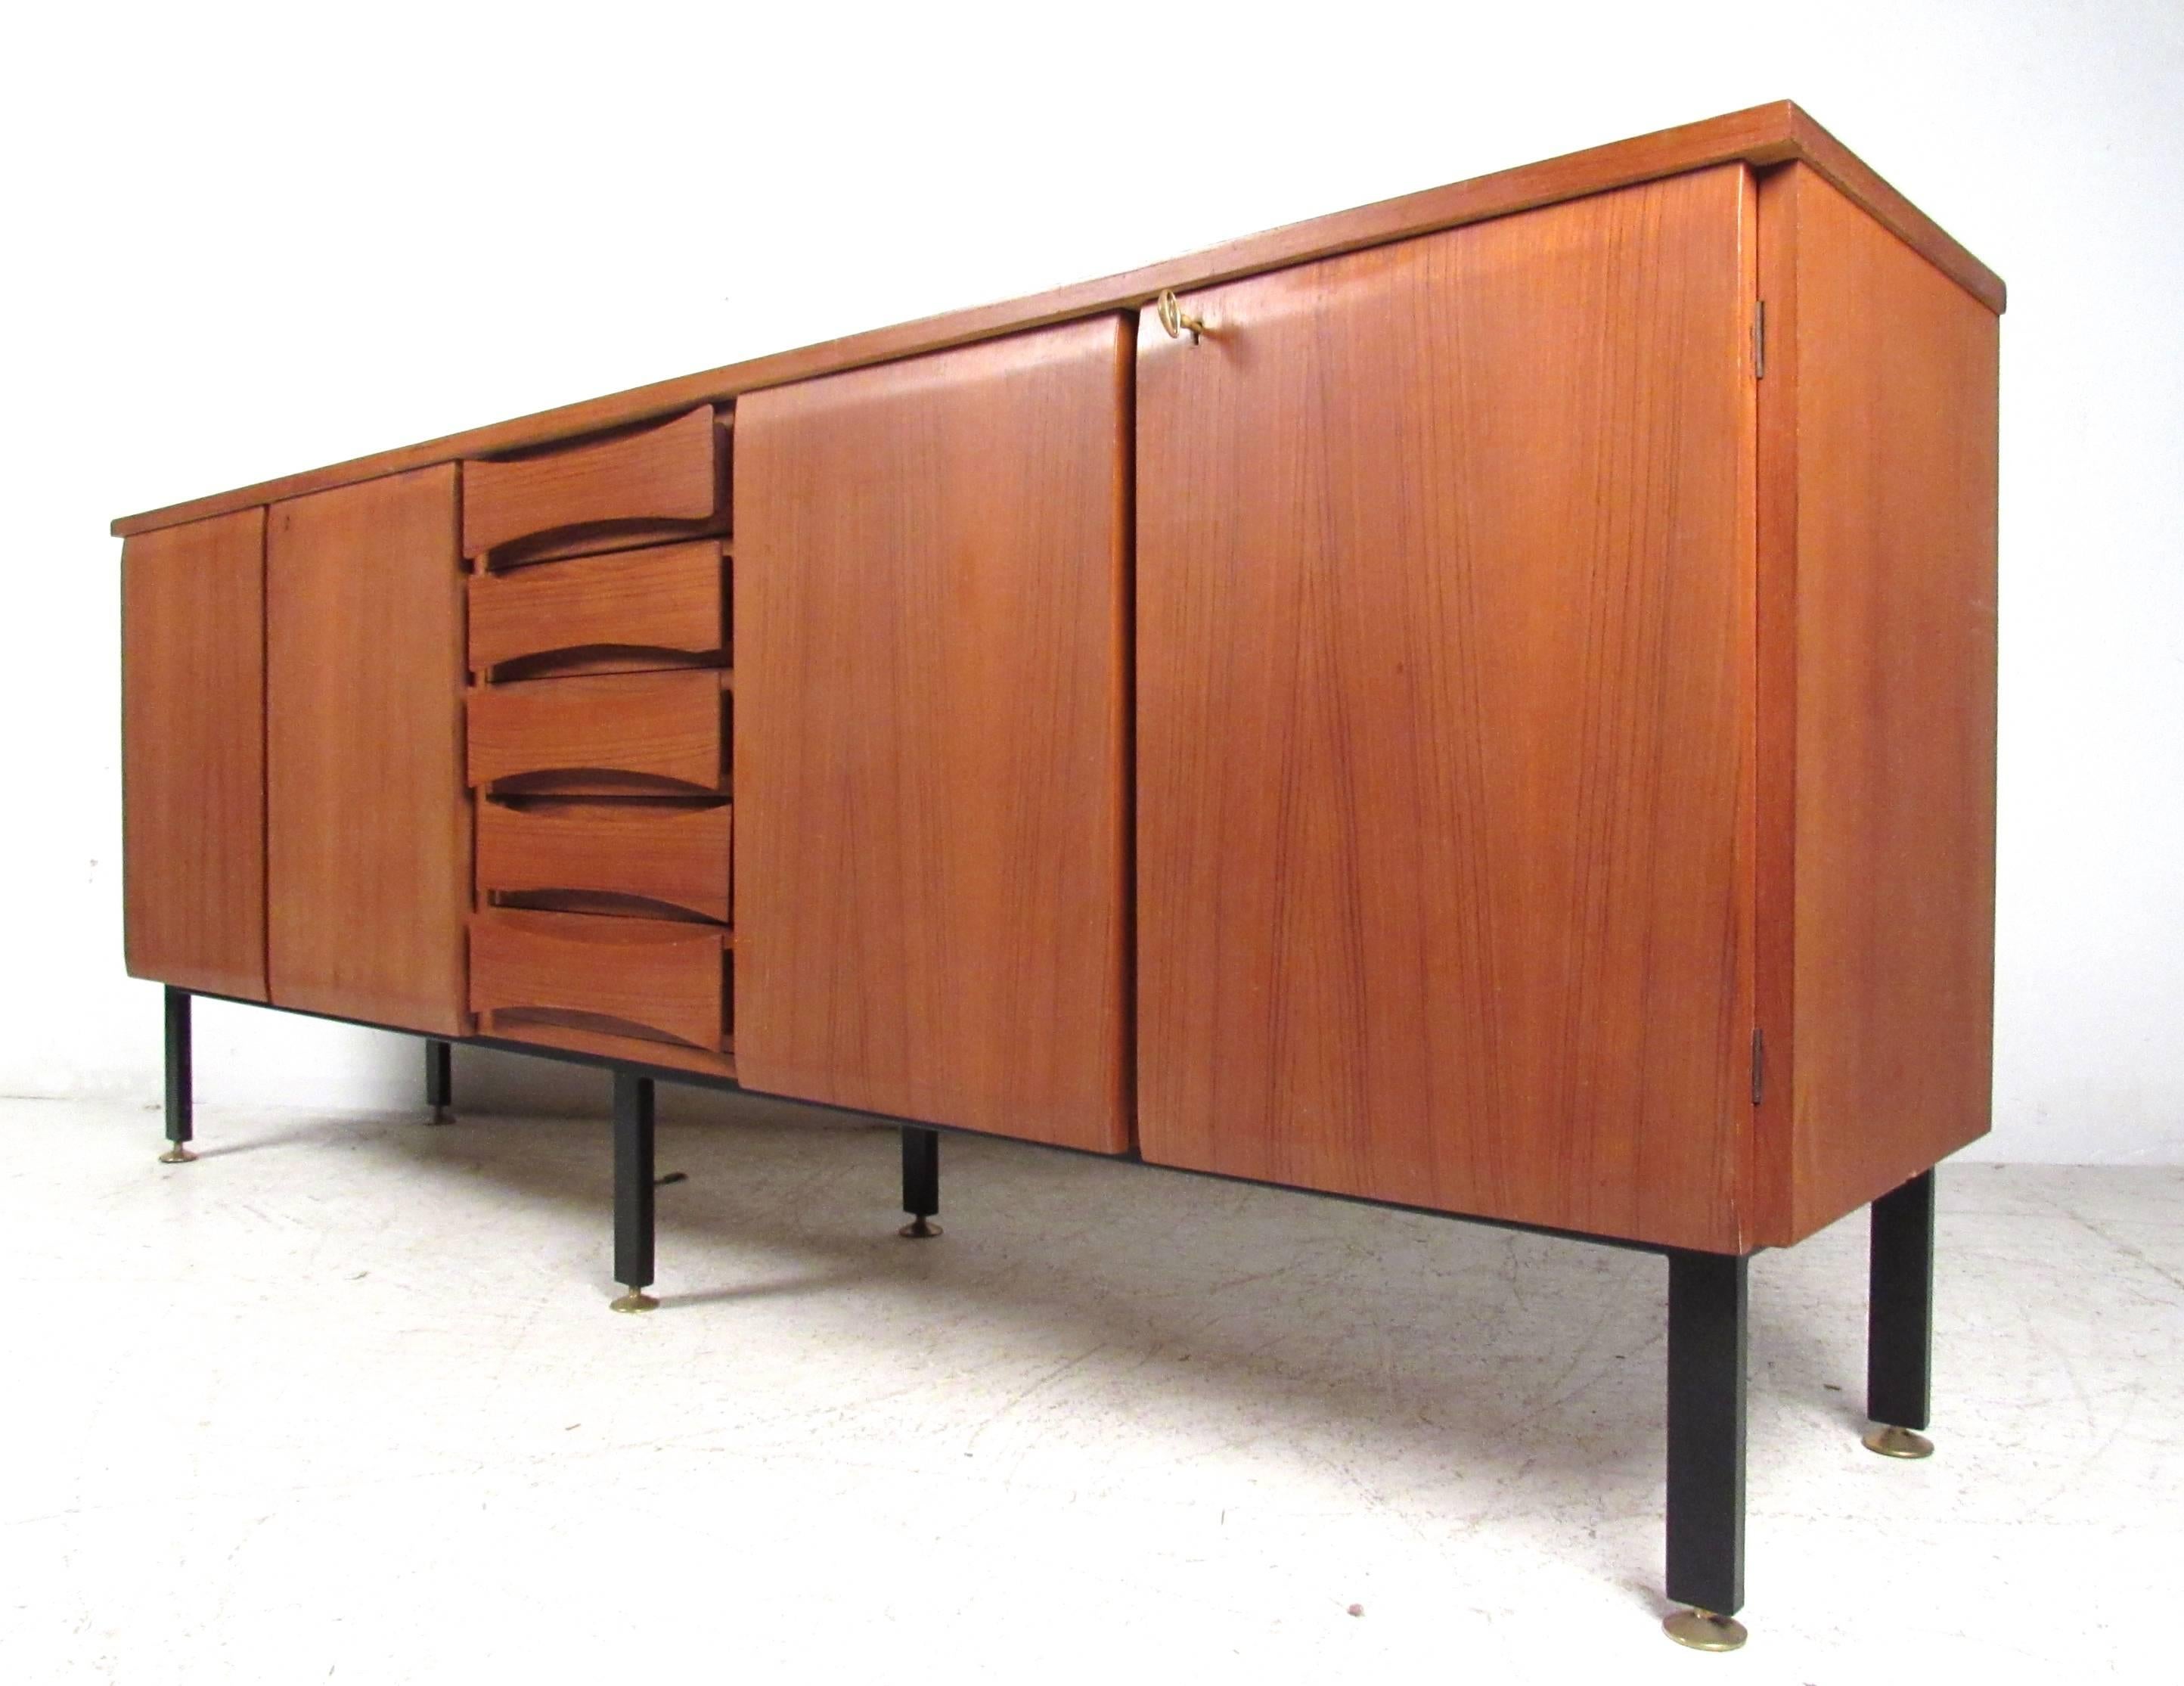 This stylish teak sideboard makes an impressive addition to any home or office decor. Sturdy metal legs, spacious locking cabinets and center drawers for added organization make this an efficient and practical piece. Please confirm item location (NY